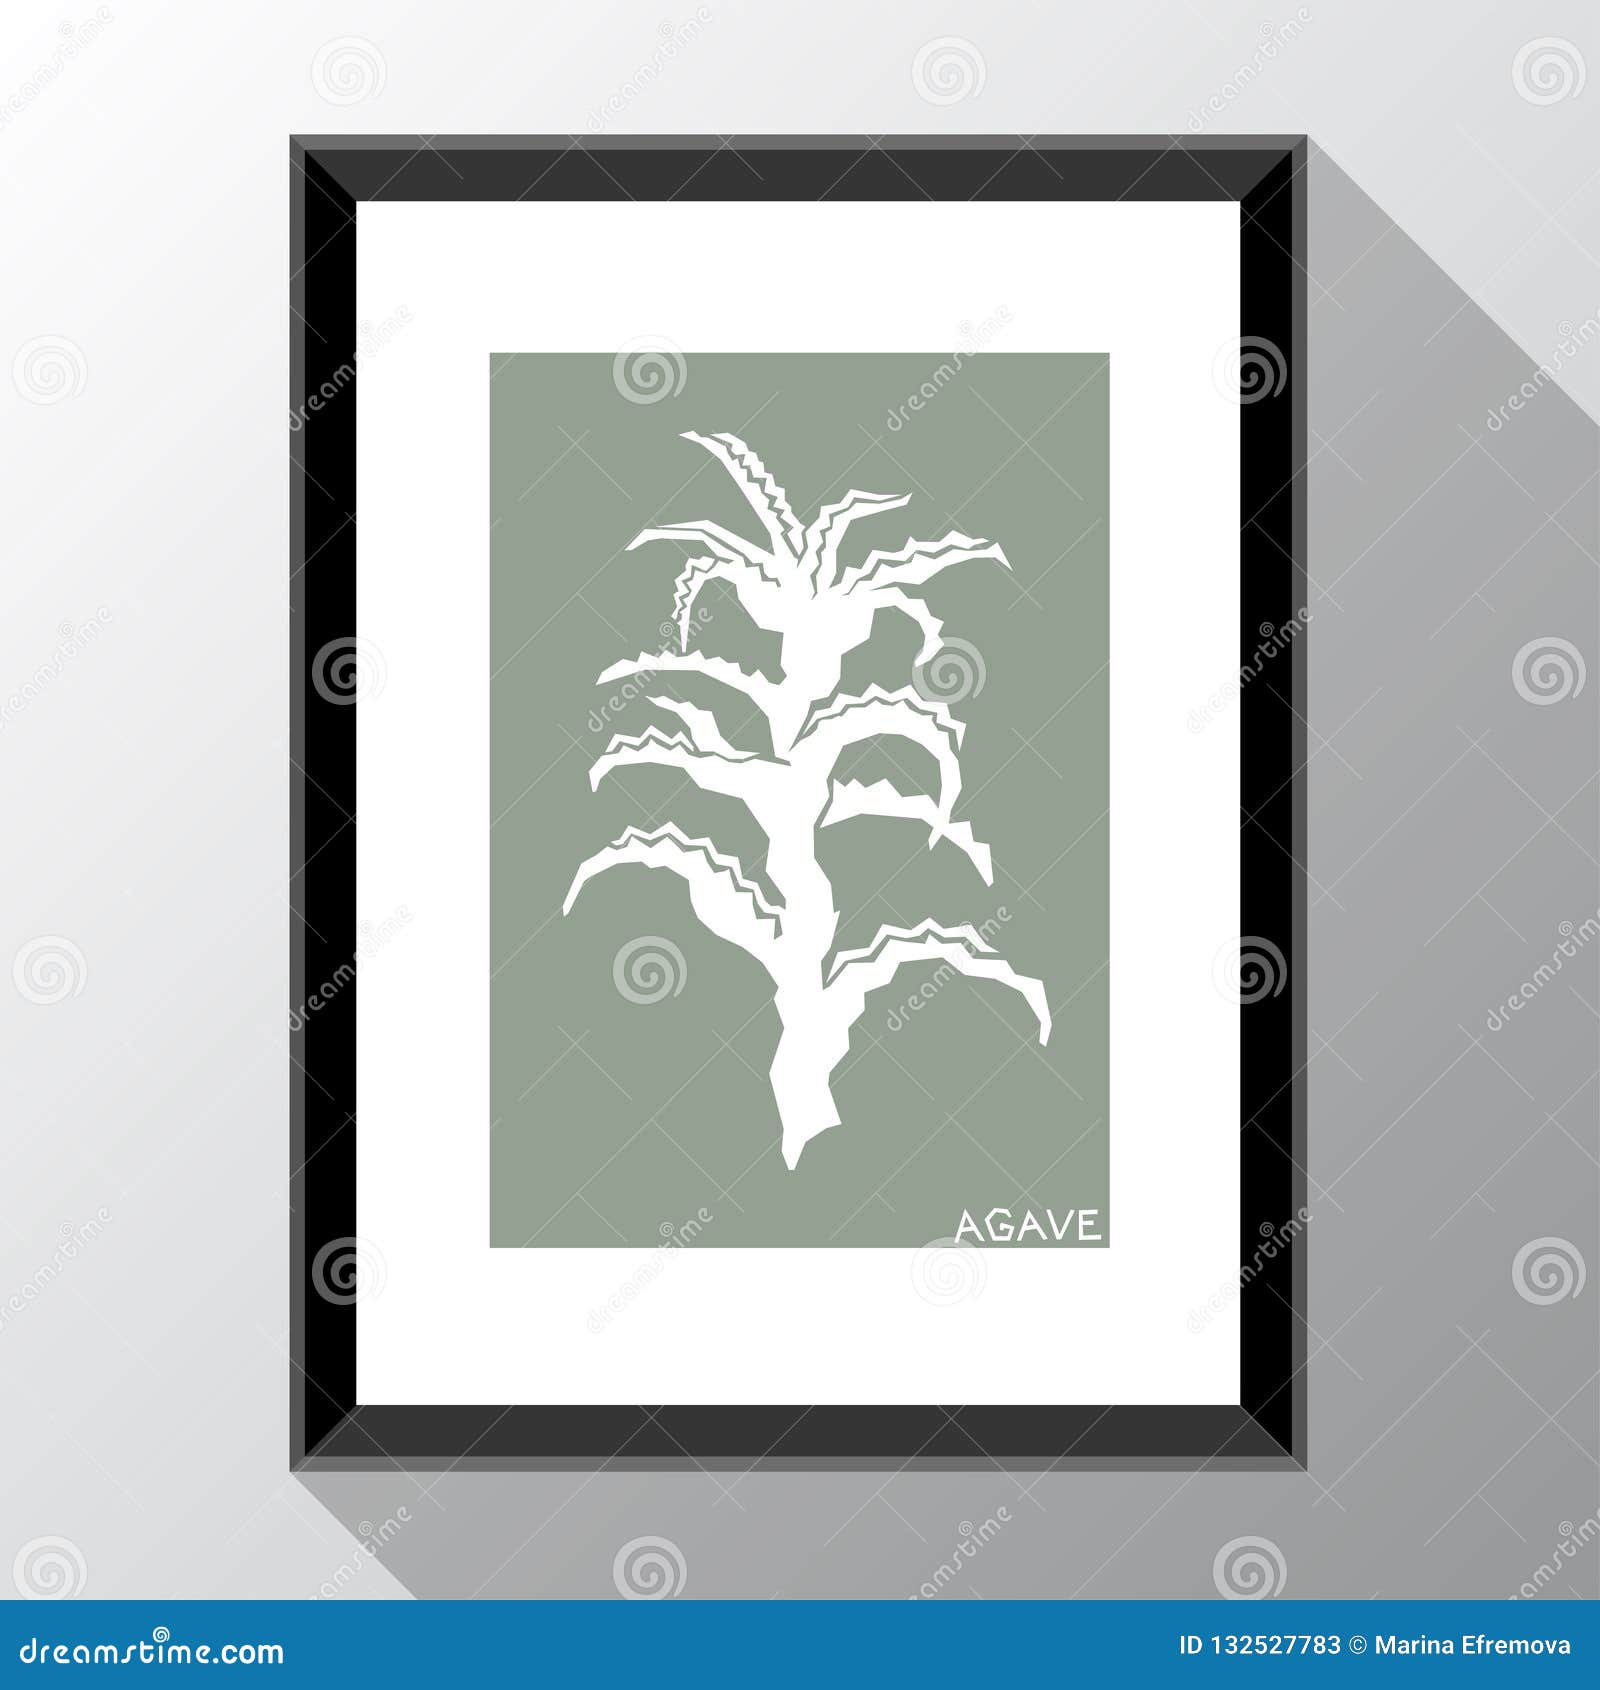  template with photo frame and agave